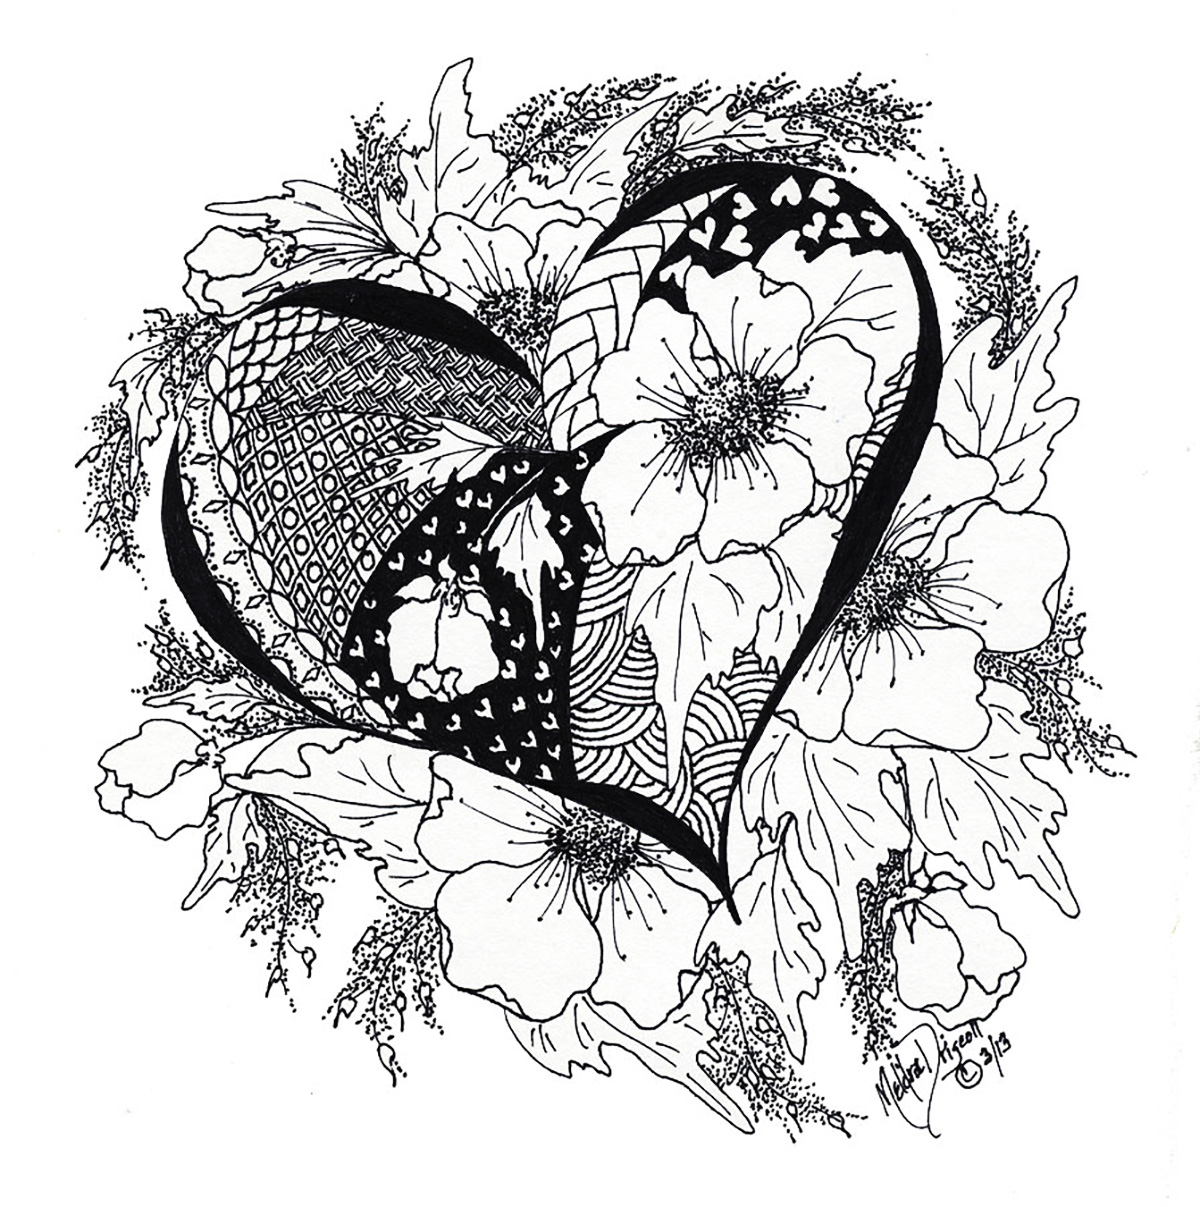 Heart with Flowers, Leaves, and beautiful abstract patterns